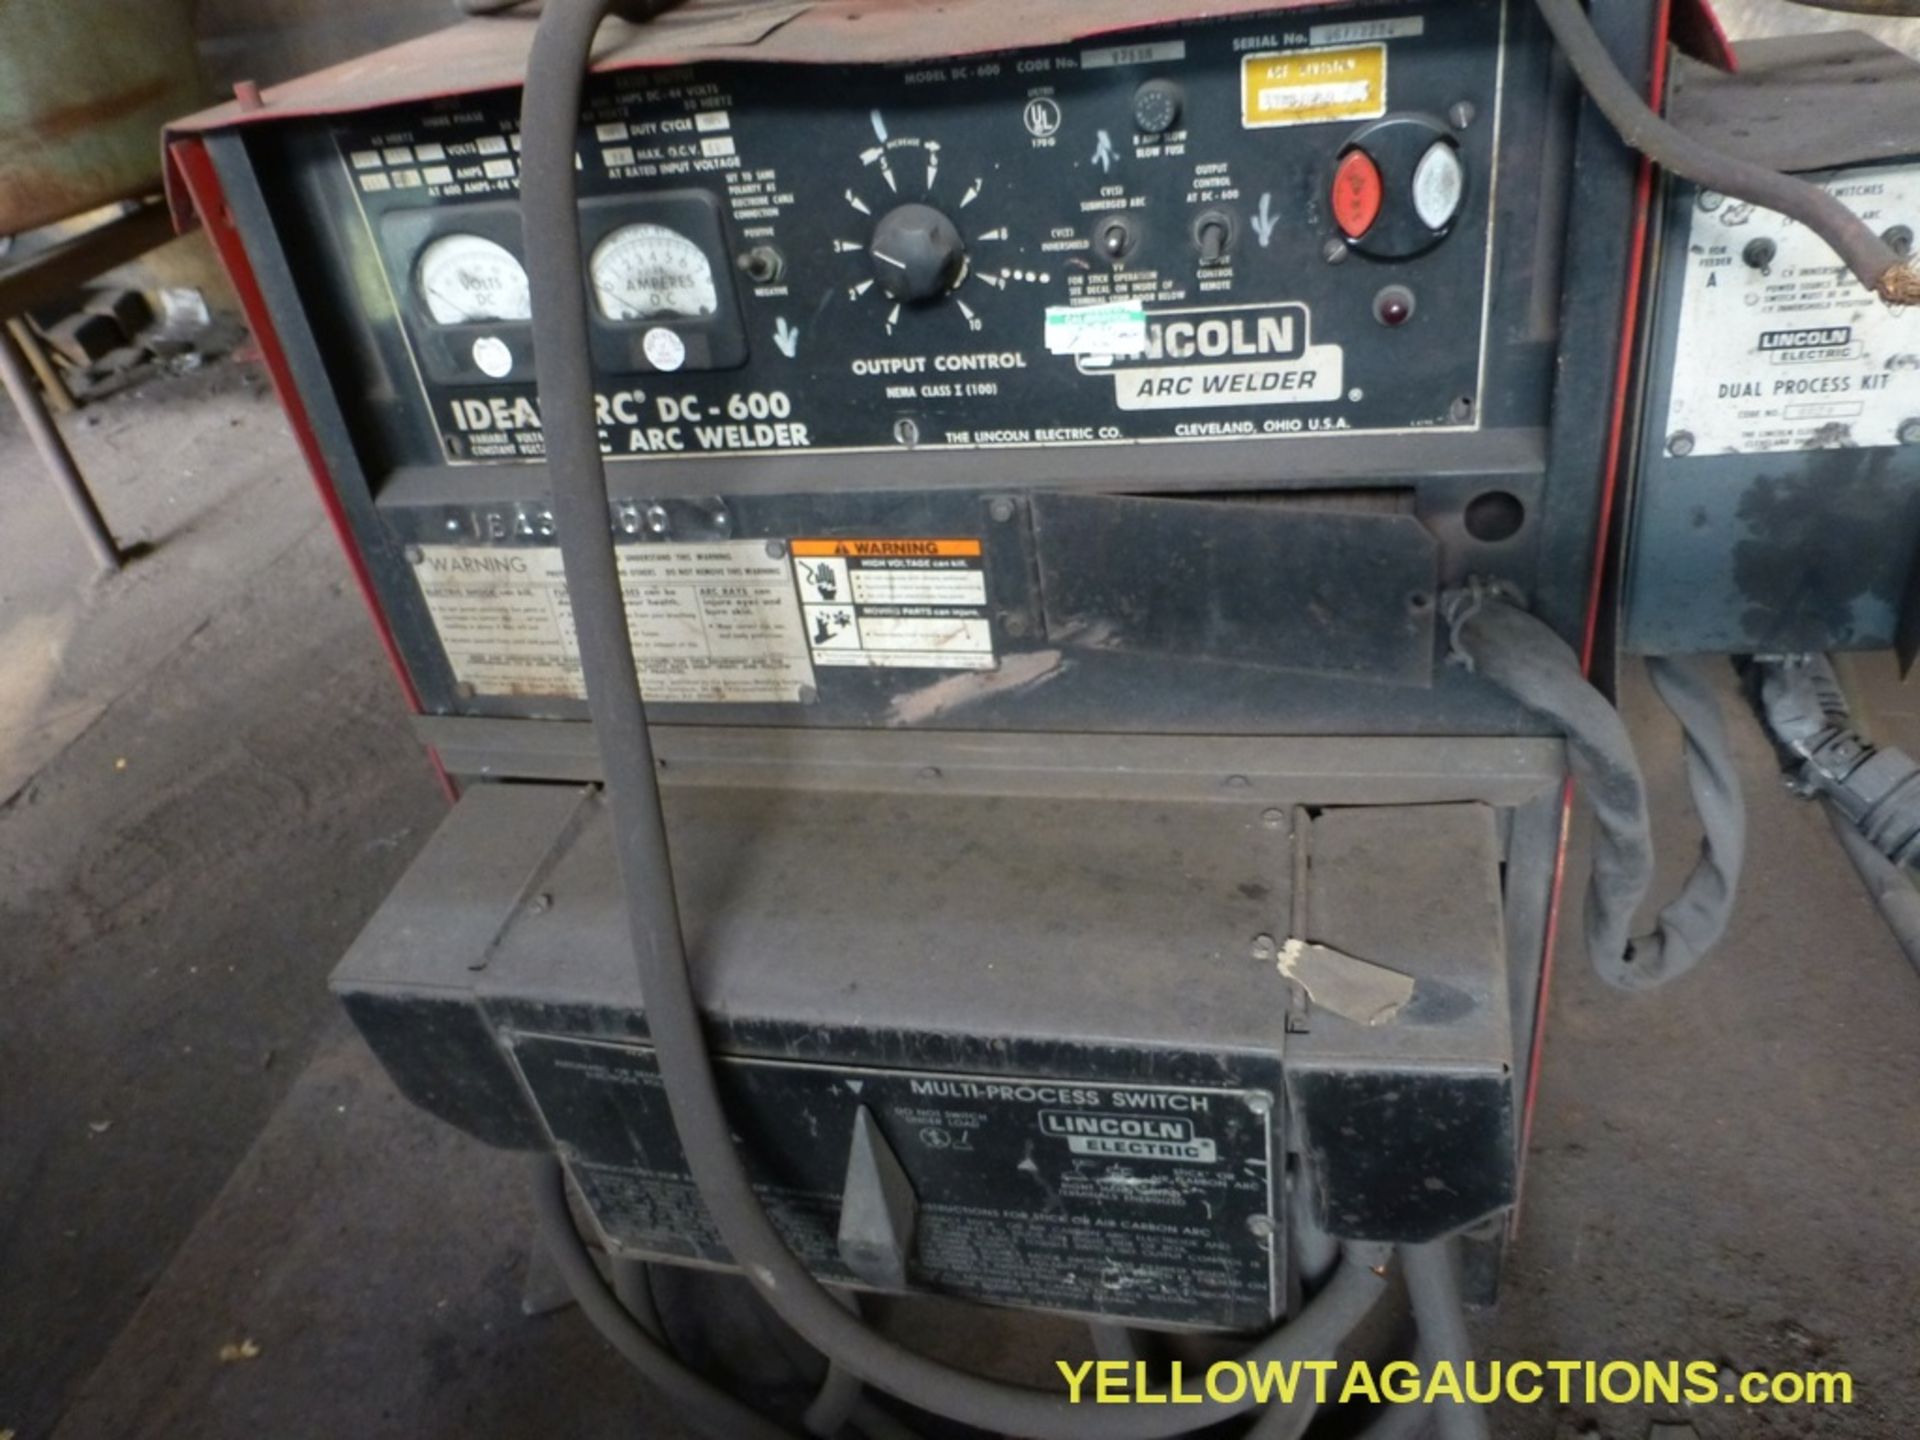 Lot of (2) Lincoln Electric Components | (1) Ideal Arc DC 600 Arc Welder Model No. DC600, Code No. 9 - Image 3 of 14